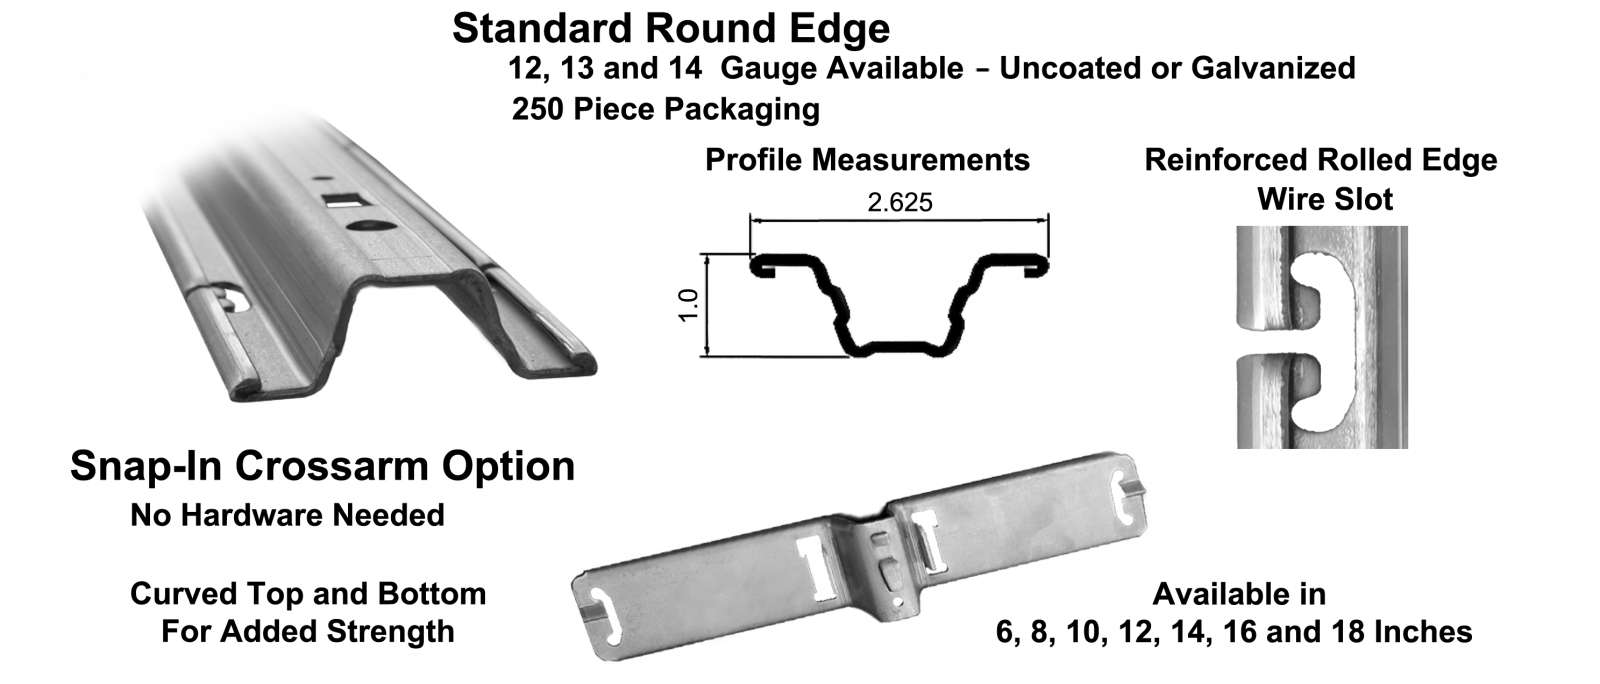 Information on Rolled Edge line post